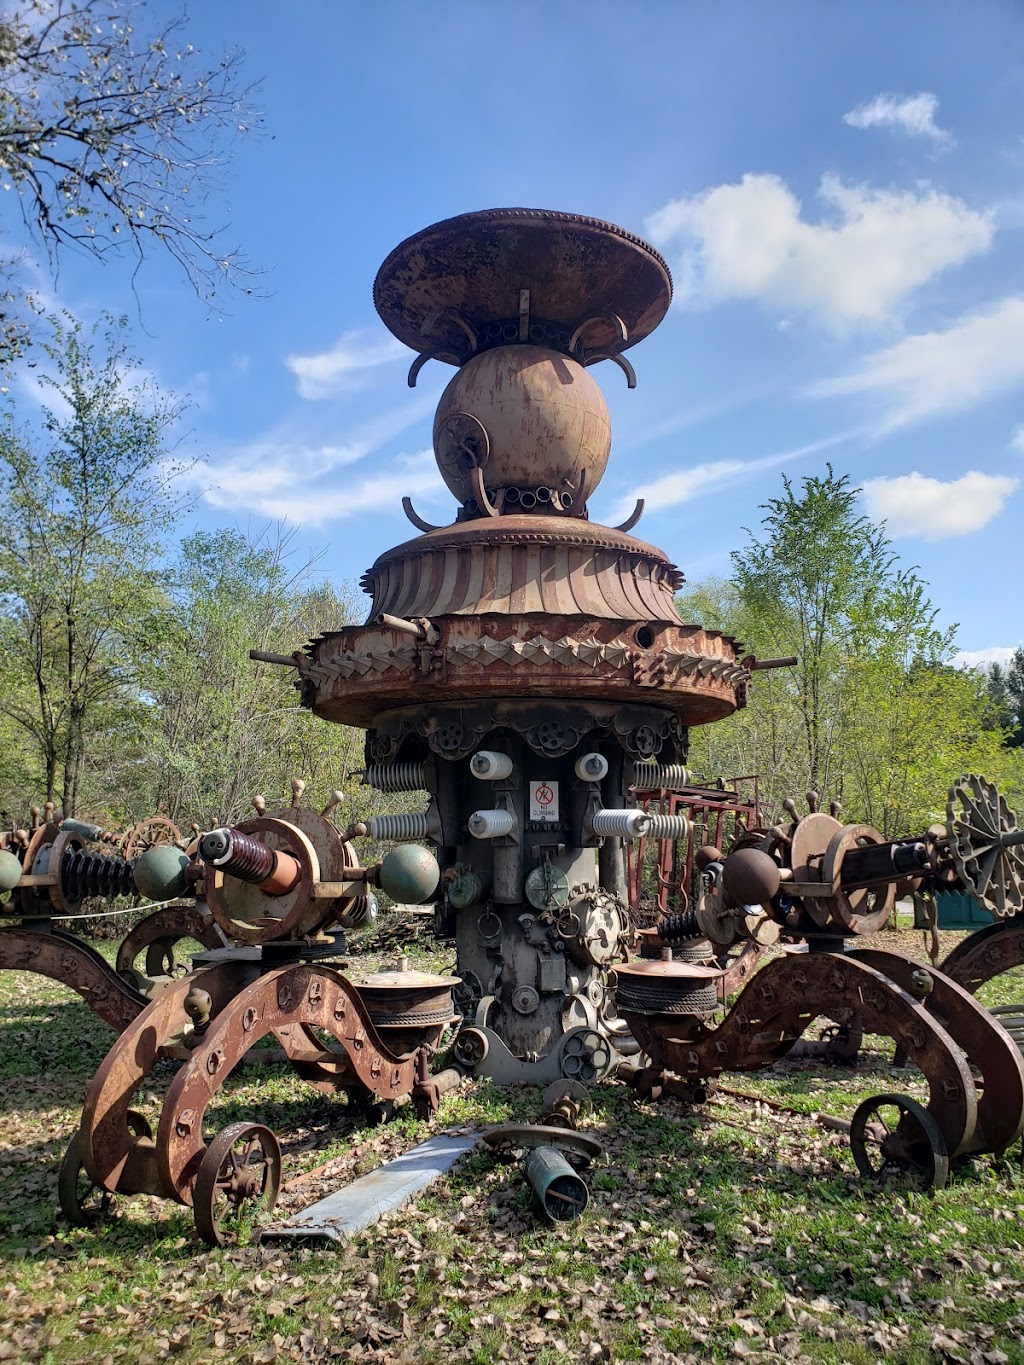 Dr. Evermors Sculpture Park | S7703 US-12, North Freedom, WI 53951, USA | Phone: (608) 219-7830